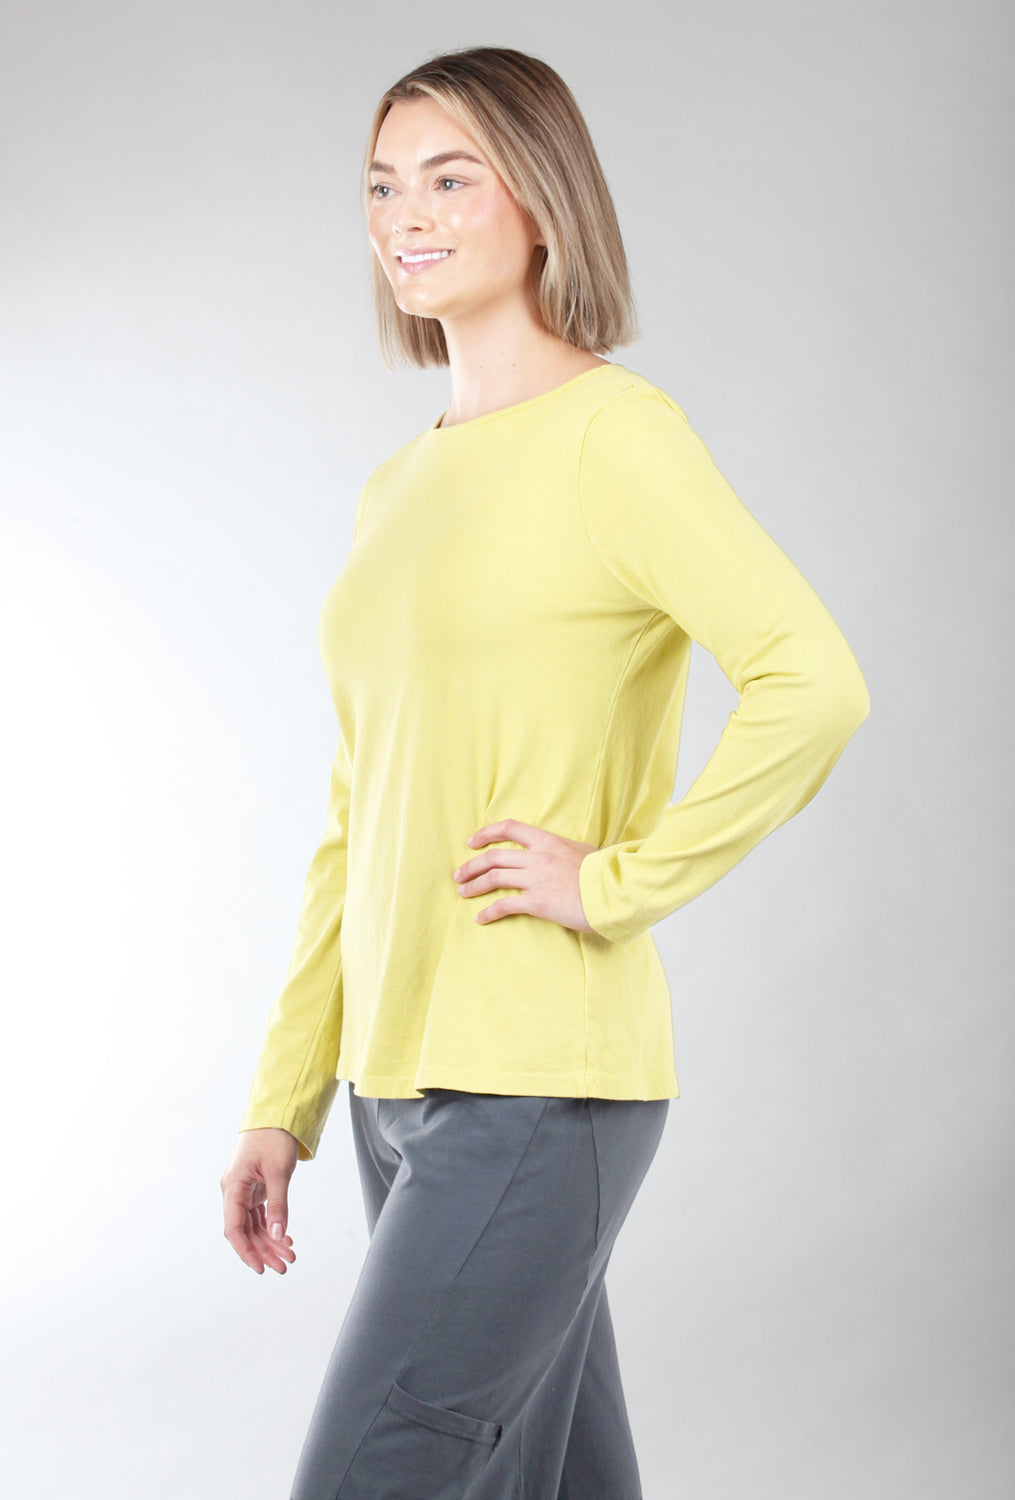 Basic L/S Boatneck Tee, Chartreuse